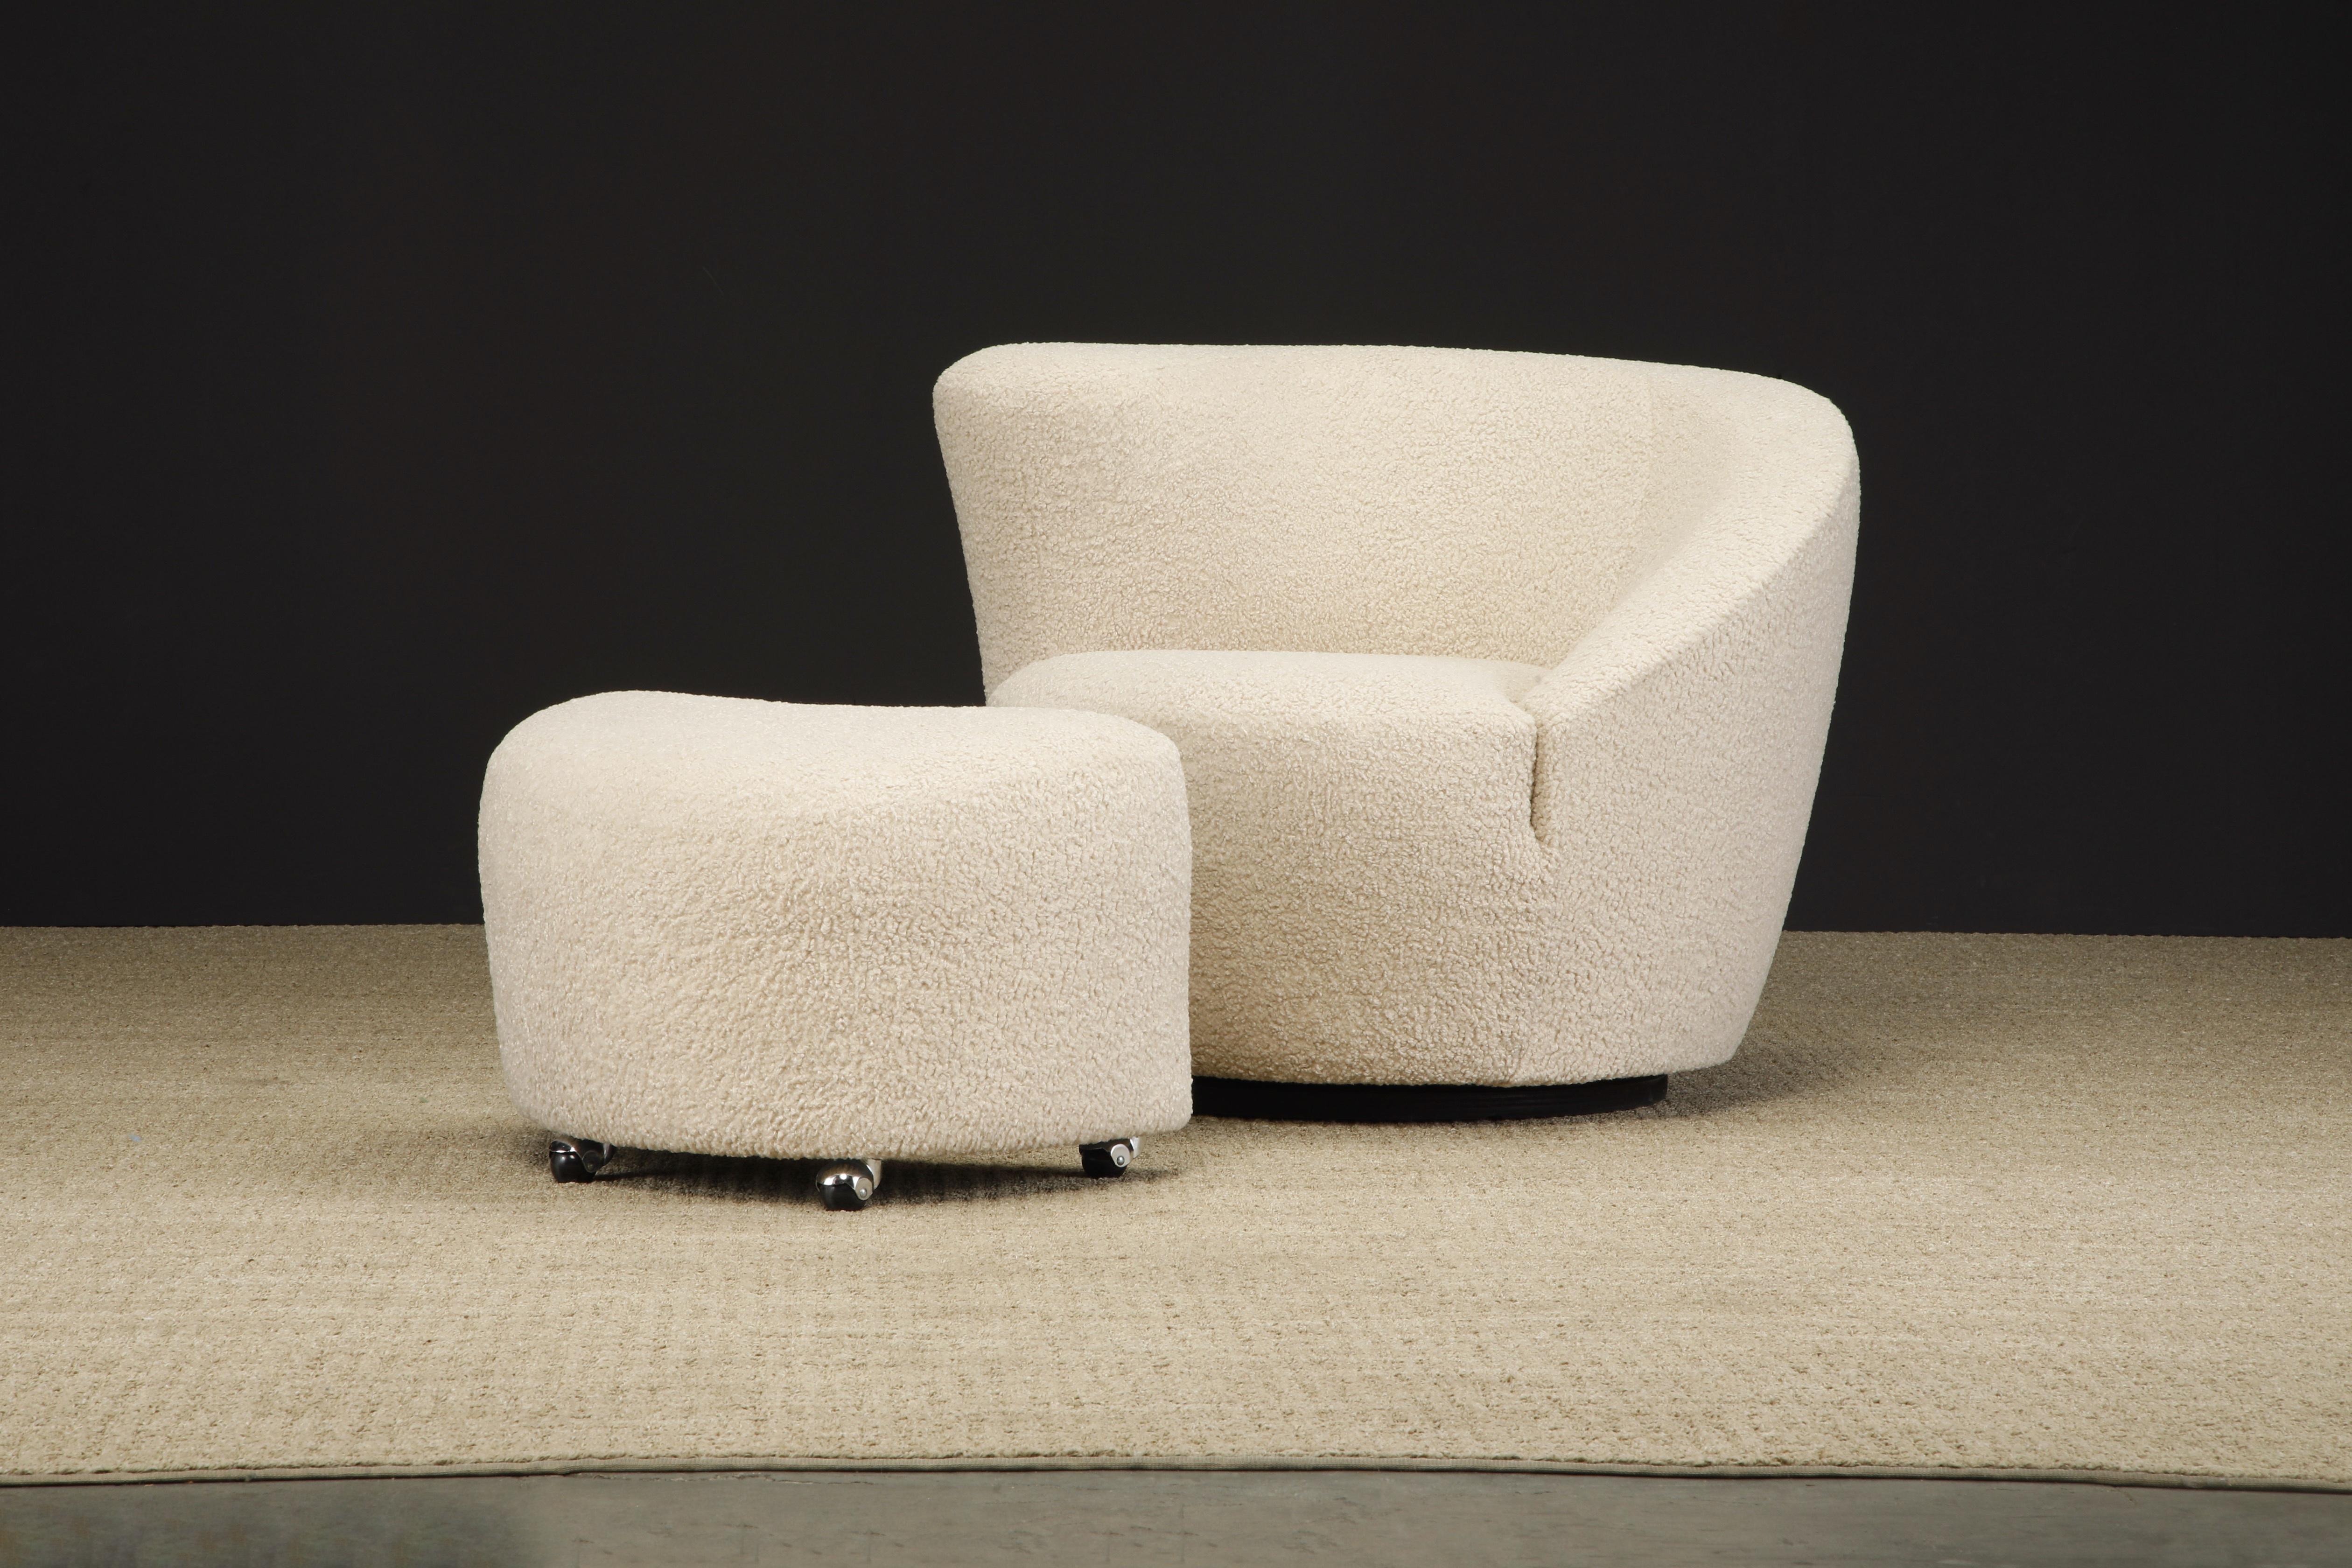 Newly reupholstered in a soft and nubby light beige bouclé, this 'Corkscrew' swivel chair with ottoman by Vladimir Kagan for Directional, circa 1980s / 90s is signed with a Directional label underneath the chair. This classic Post-Modern club chairs